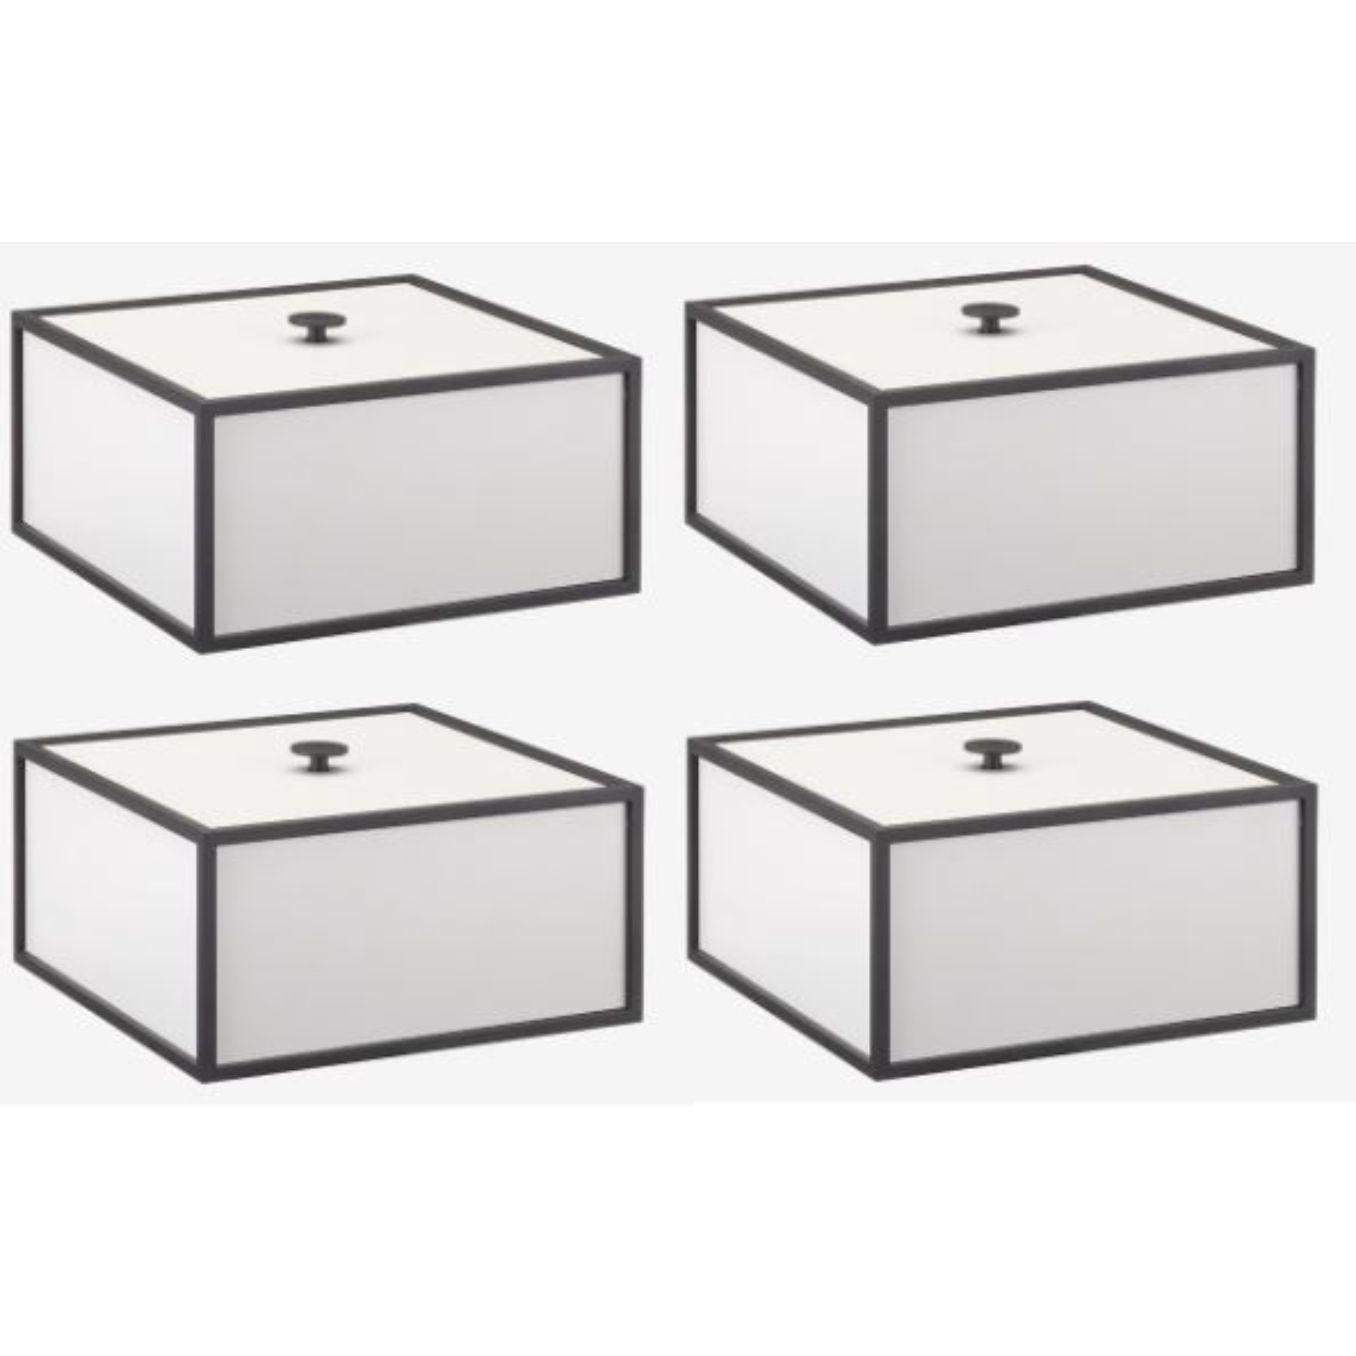 Set of 4 light grey frame 20 box by Lassen
Dimensions: D 20 x W 20 x H 10 cm 
Materials: melamin, melamine, metal, veneer
Weight: 2.00 Kg

Frame Box is a square box in a cubistic shape. The simple boxes are inspired by the Kubus candleholder by